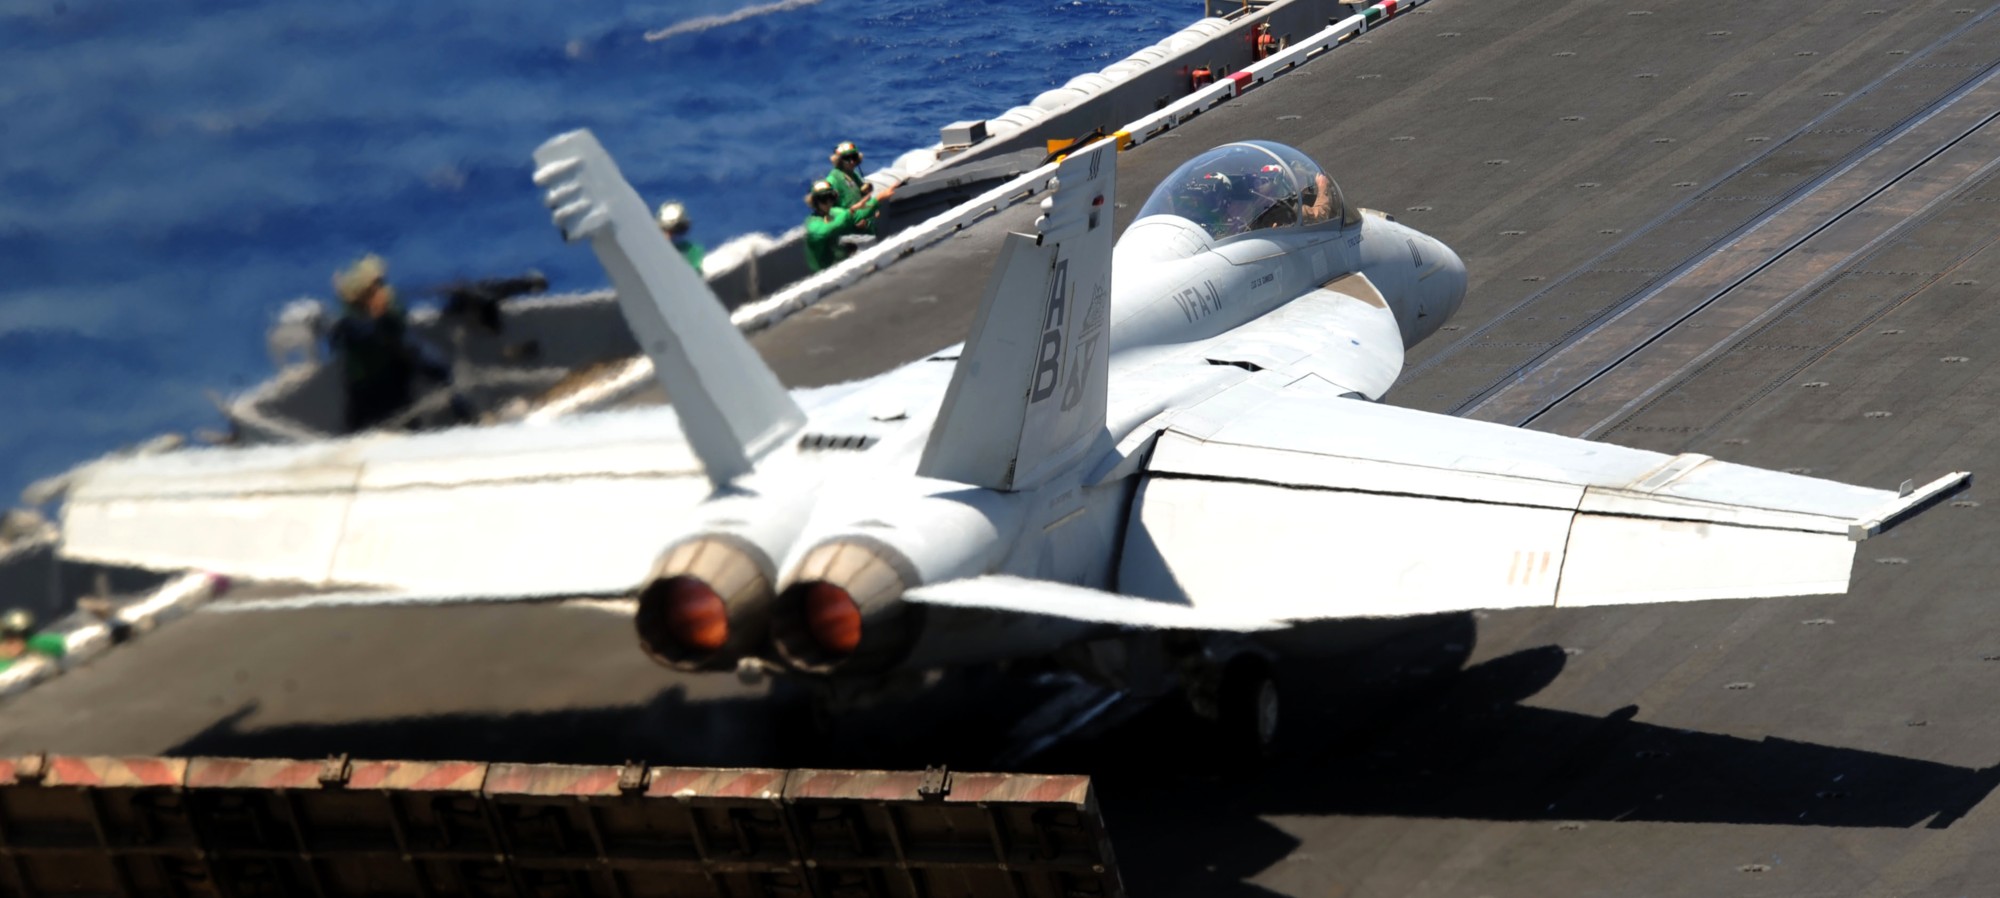 vfa-11 red rippers strike fighter squadron us navy f/a-18f super hornet carrier air wing cvw-1 uss enterprise cvn-65 37